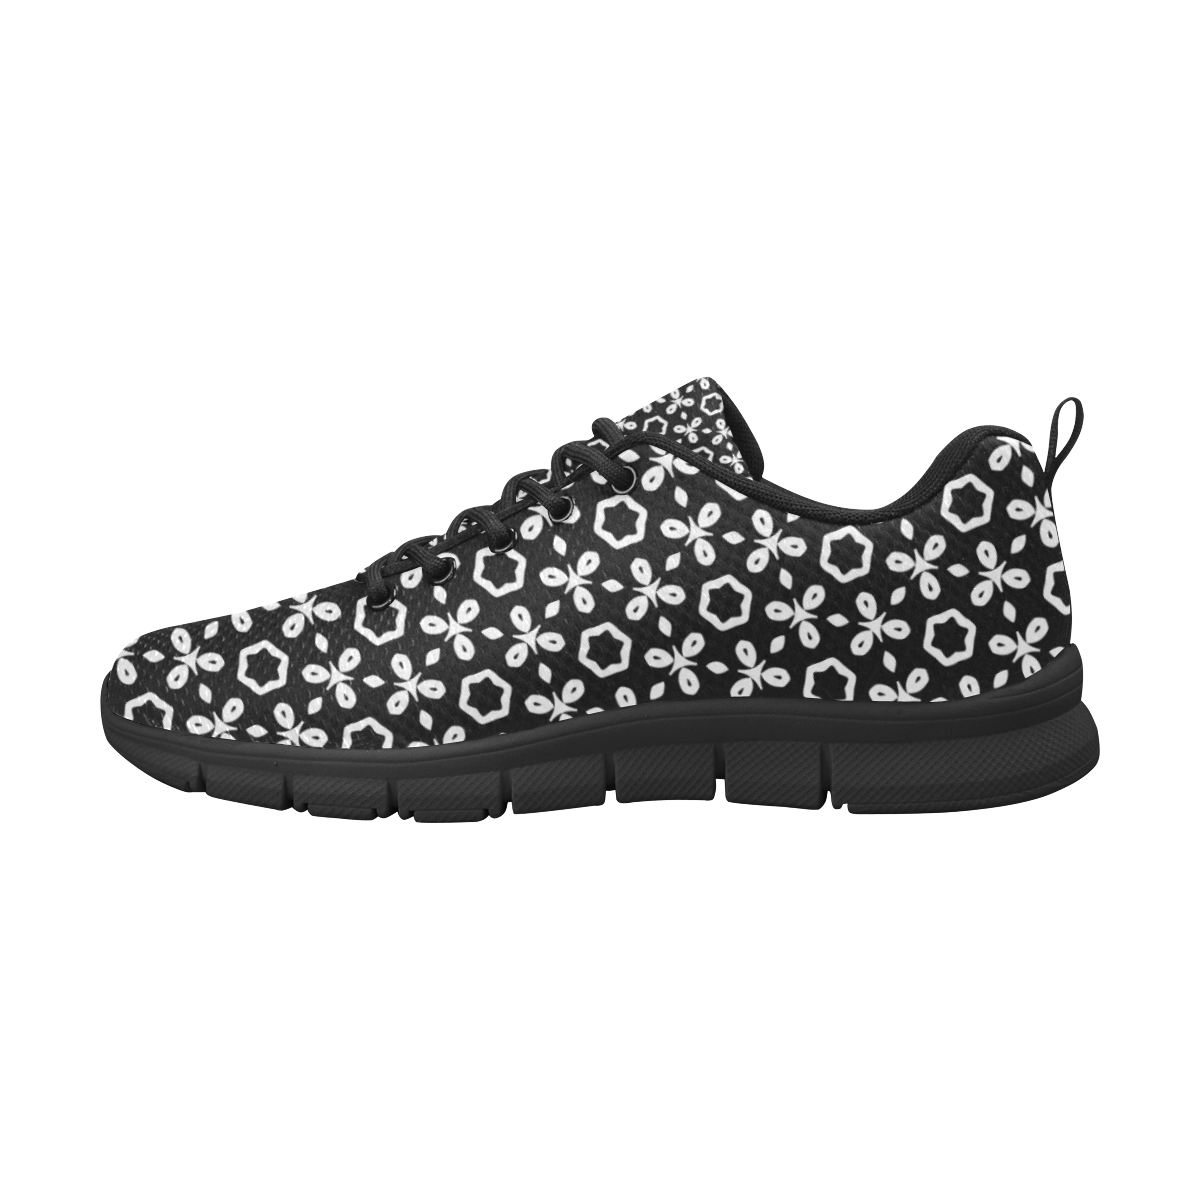 geometric pattern black and white Women's Breathable Running Shoes/Large (Model 055)